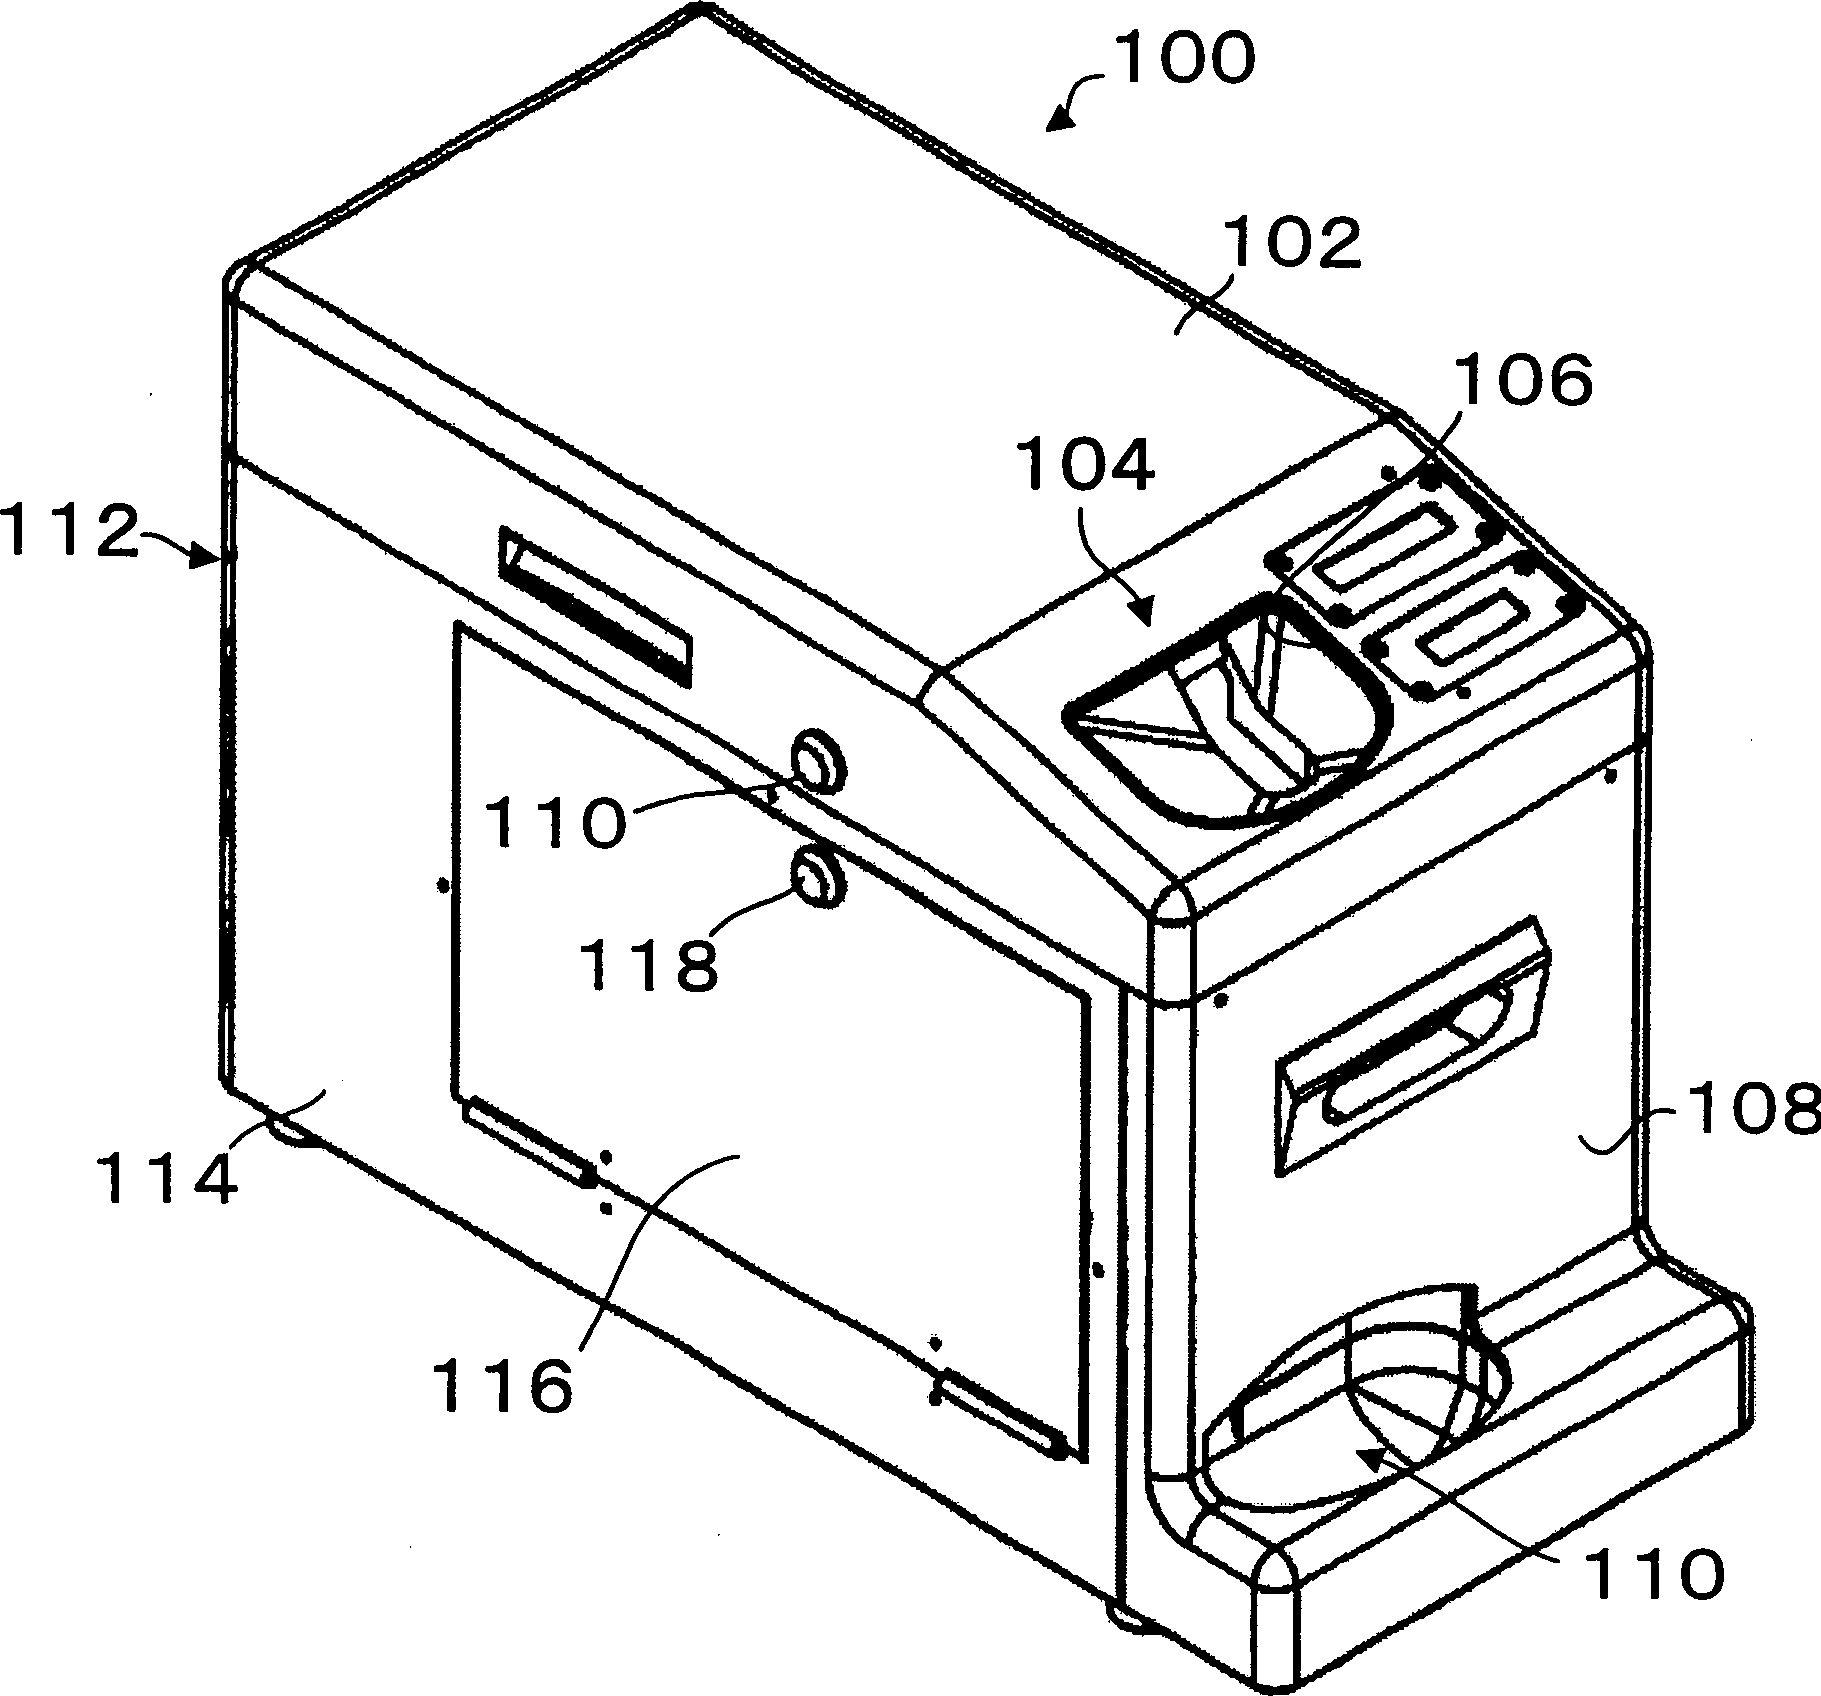 A receiving and dispensing device for coins